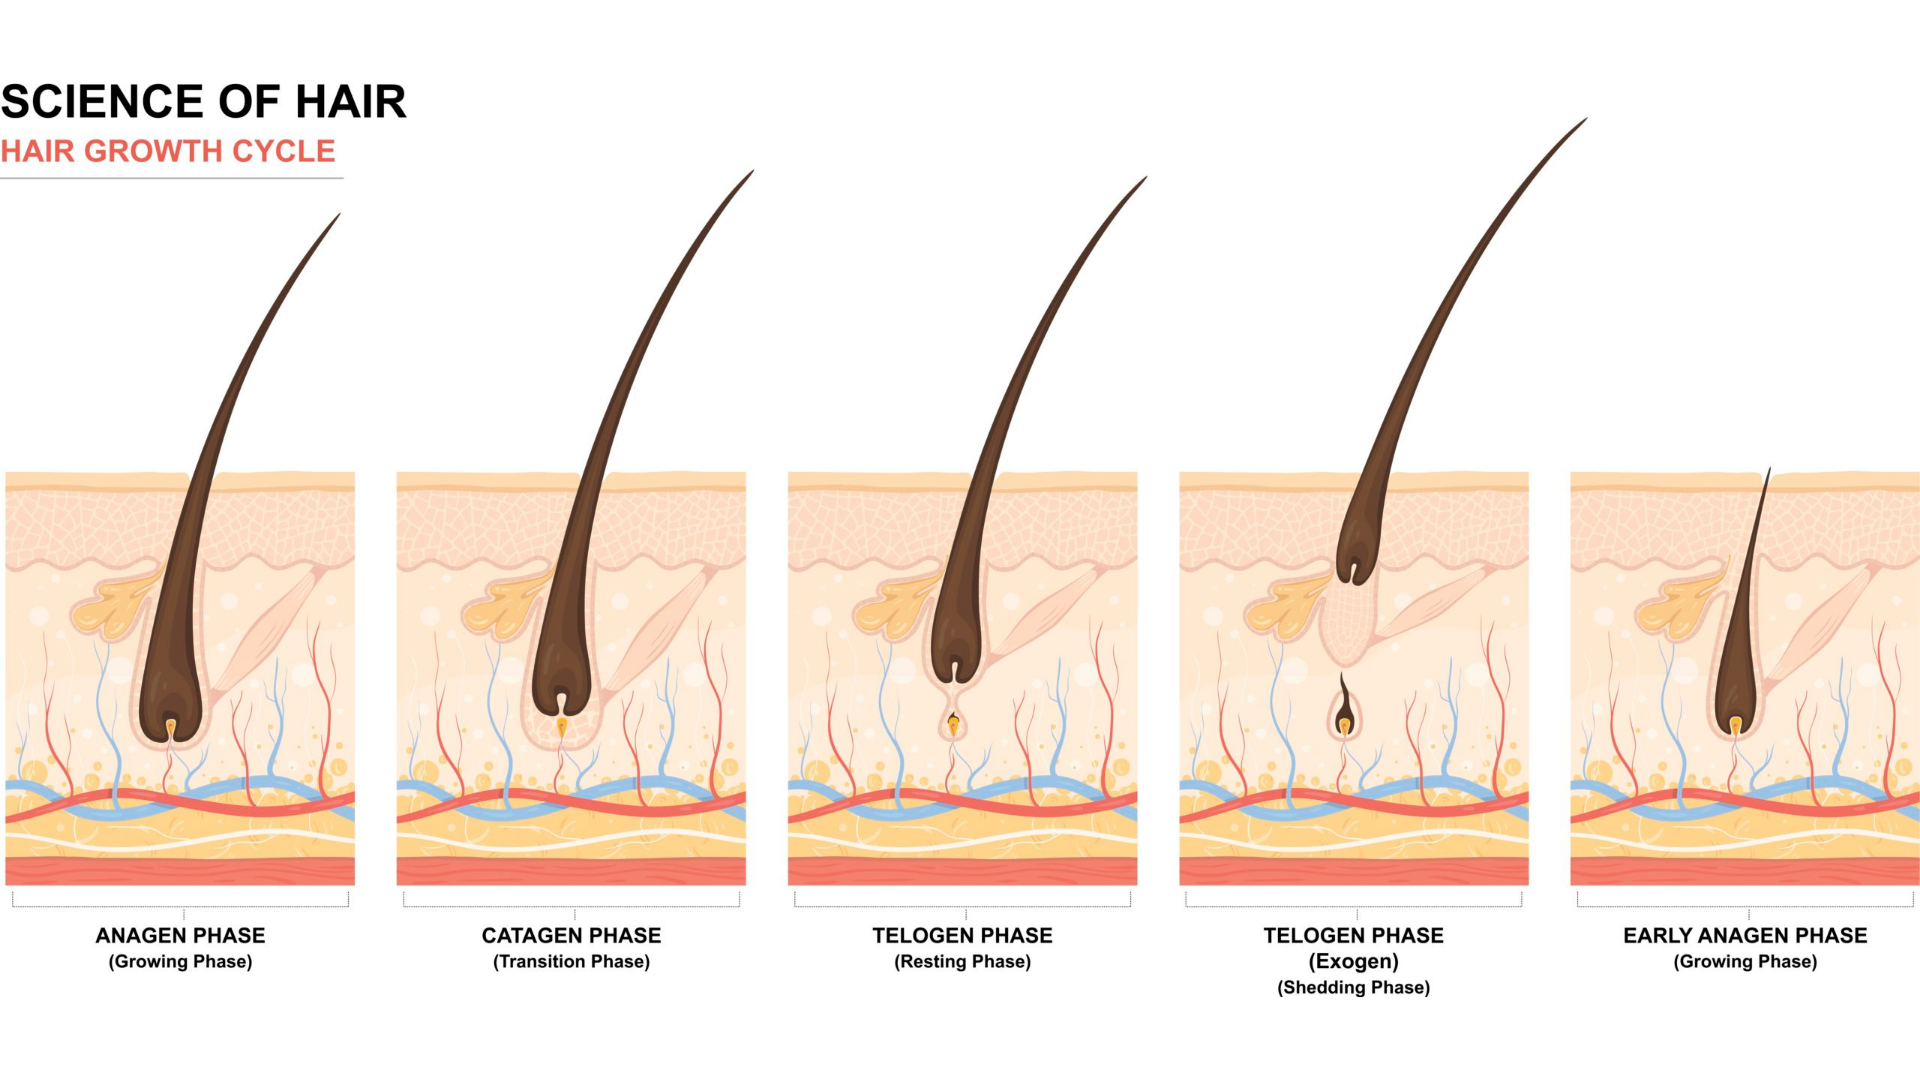 Normal hair growth cycle